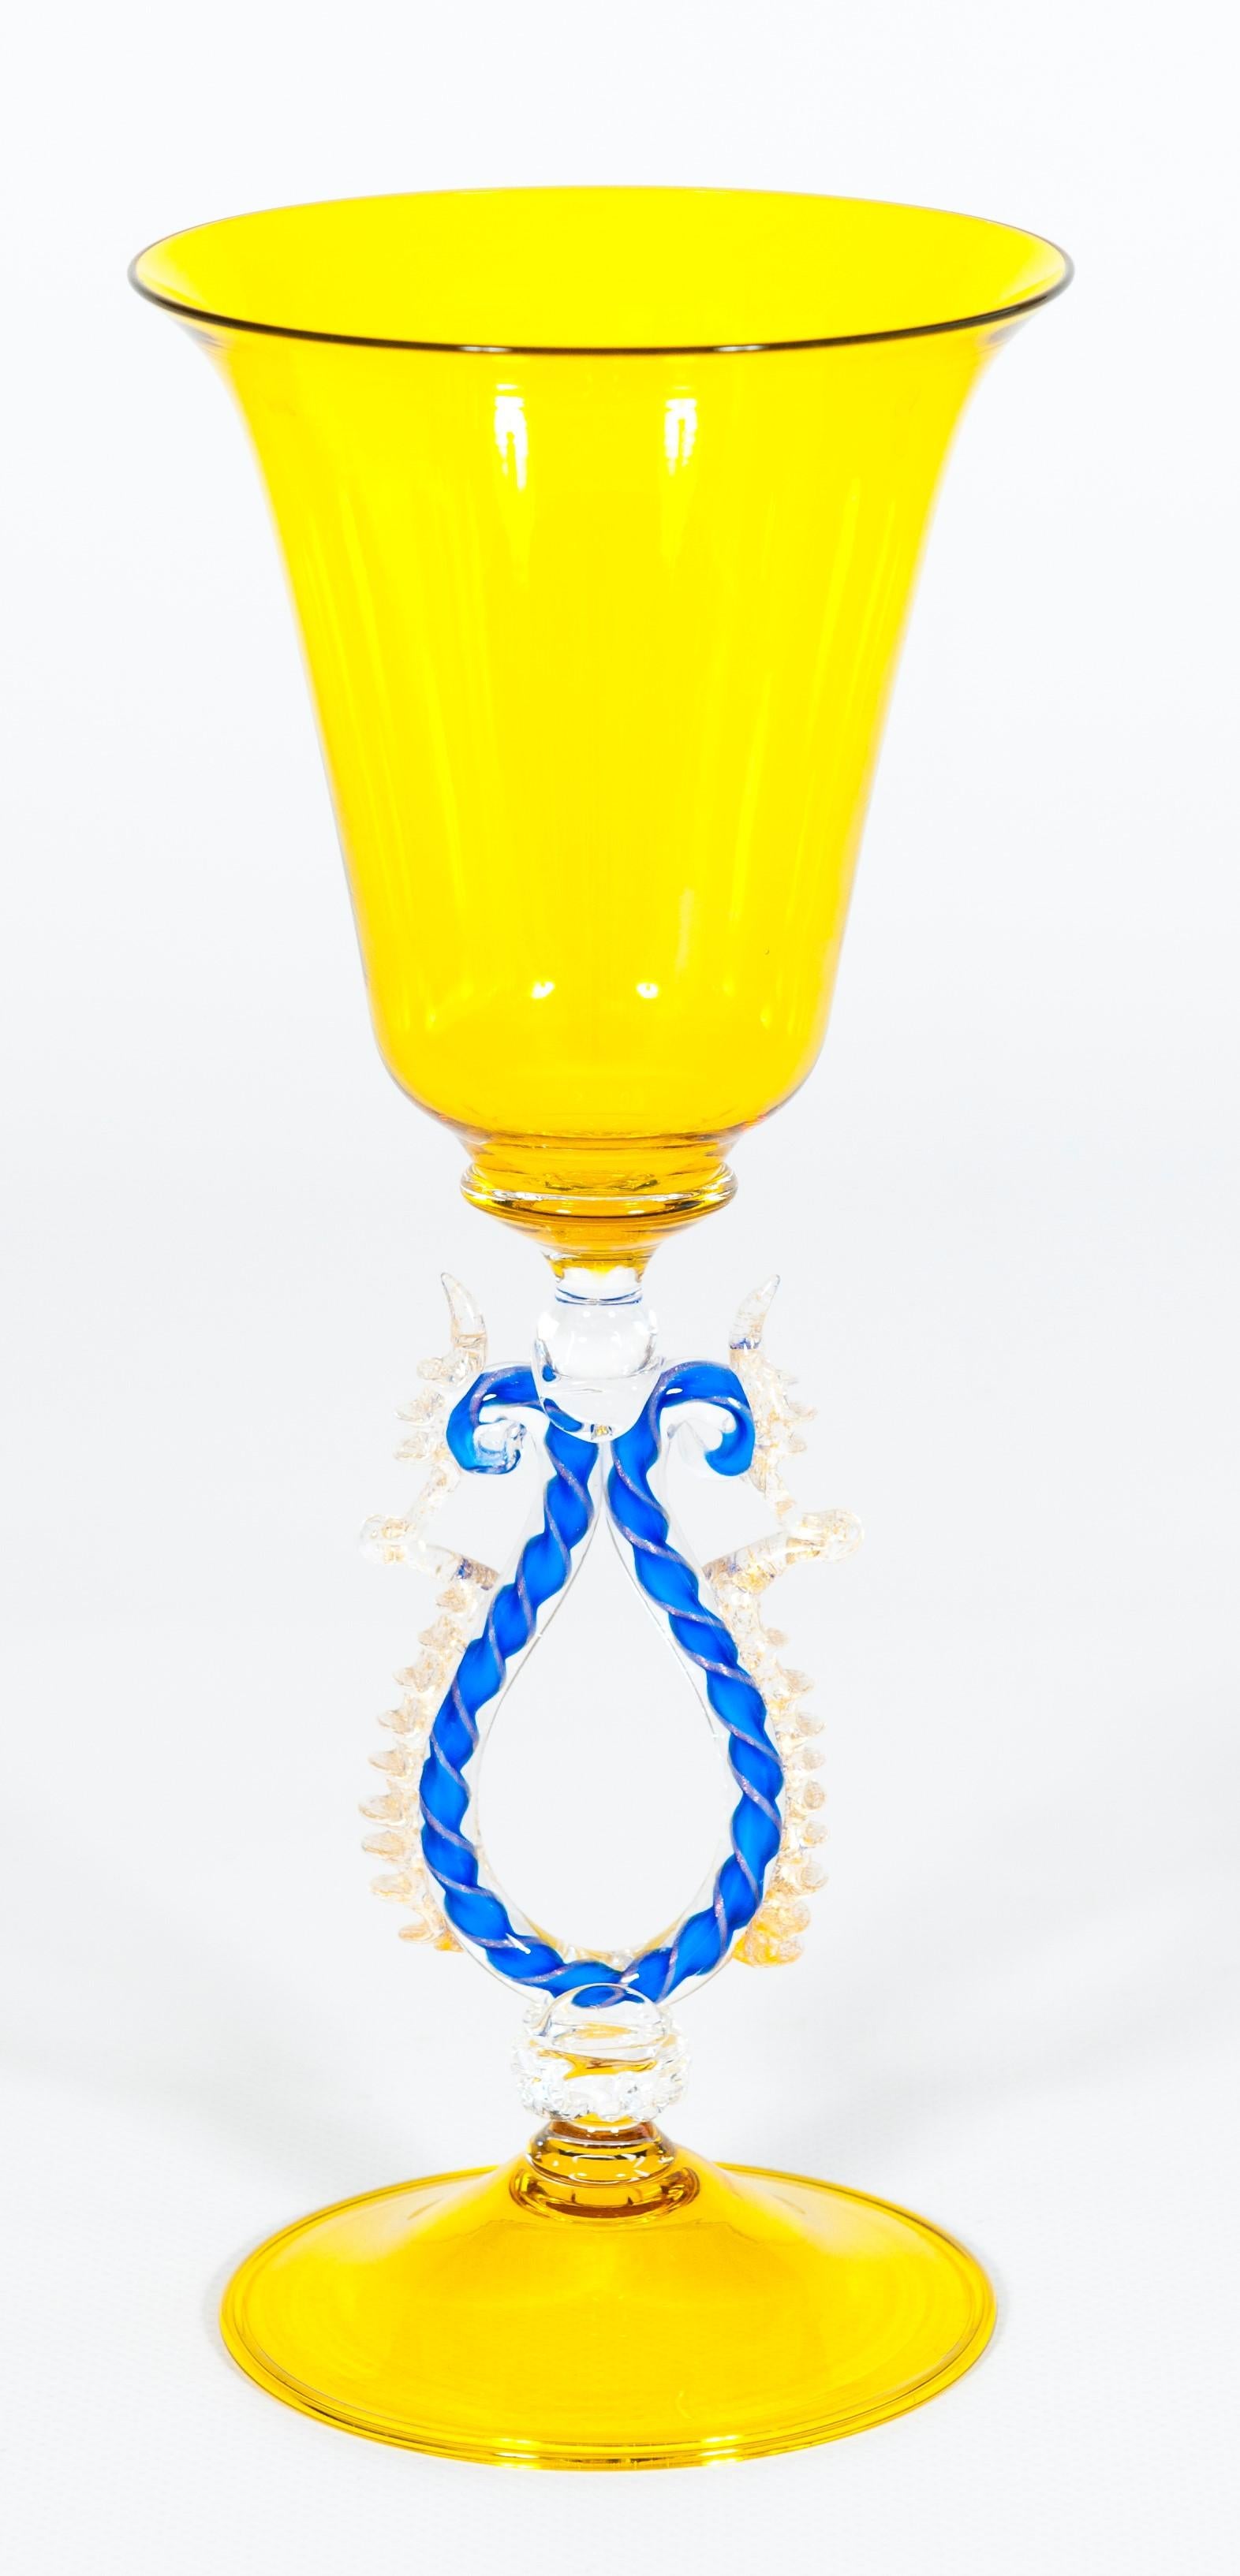 Yellow and blue Venetian goblet with gold finishes in Murano glass, Italy, 1990s
This outstanding goblet is a fine example of the Murano glassblowing tradition. Its bright yellow and blue colors, with gold finishes, emanate and air of elegance, and